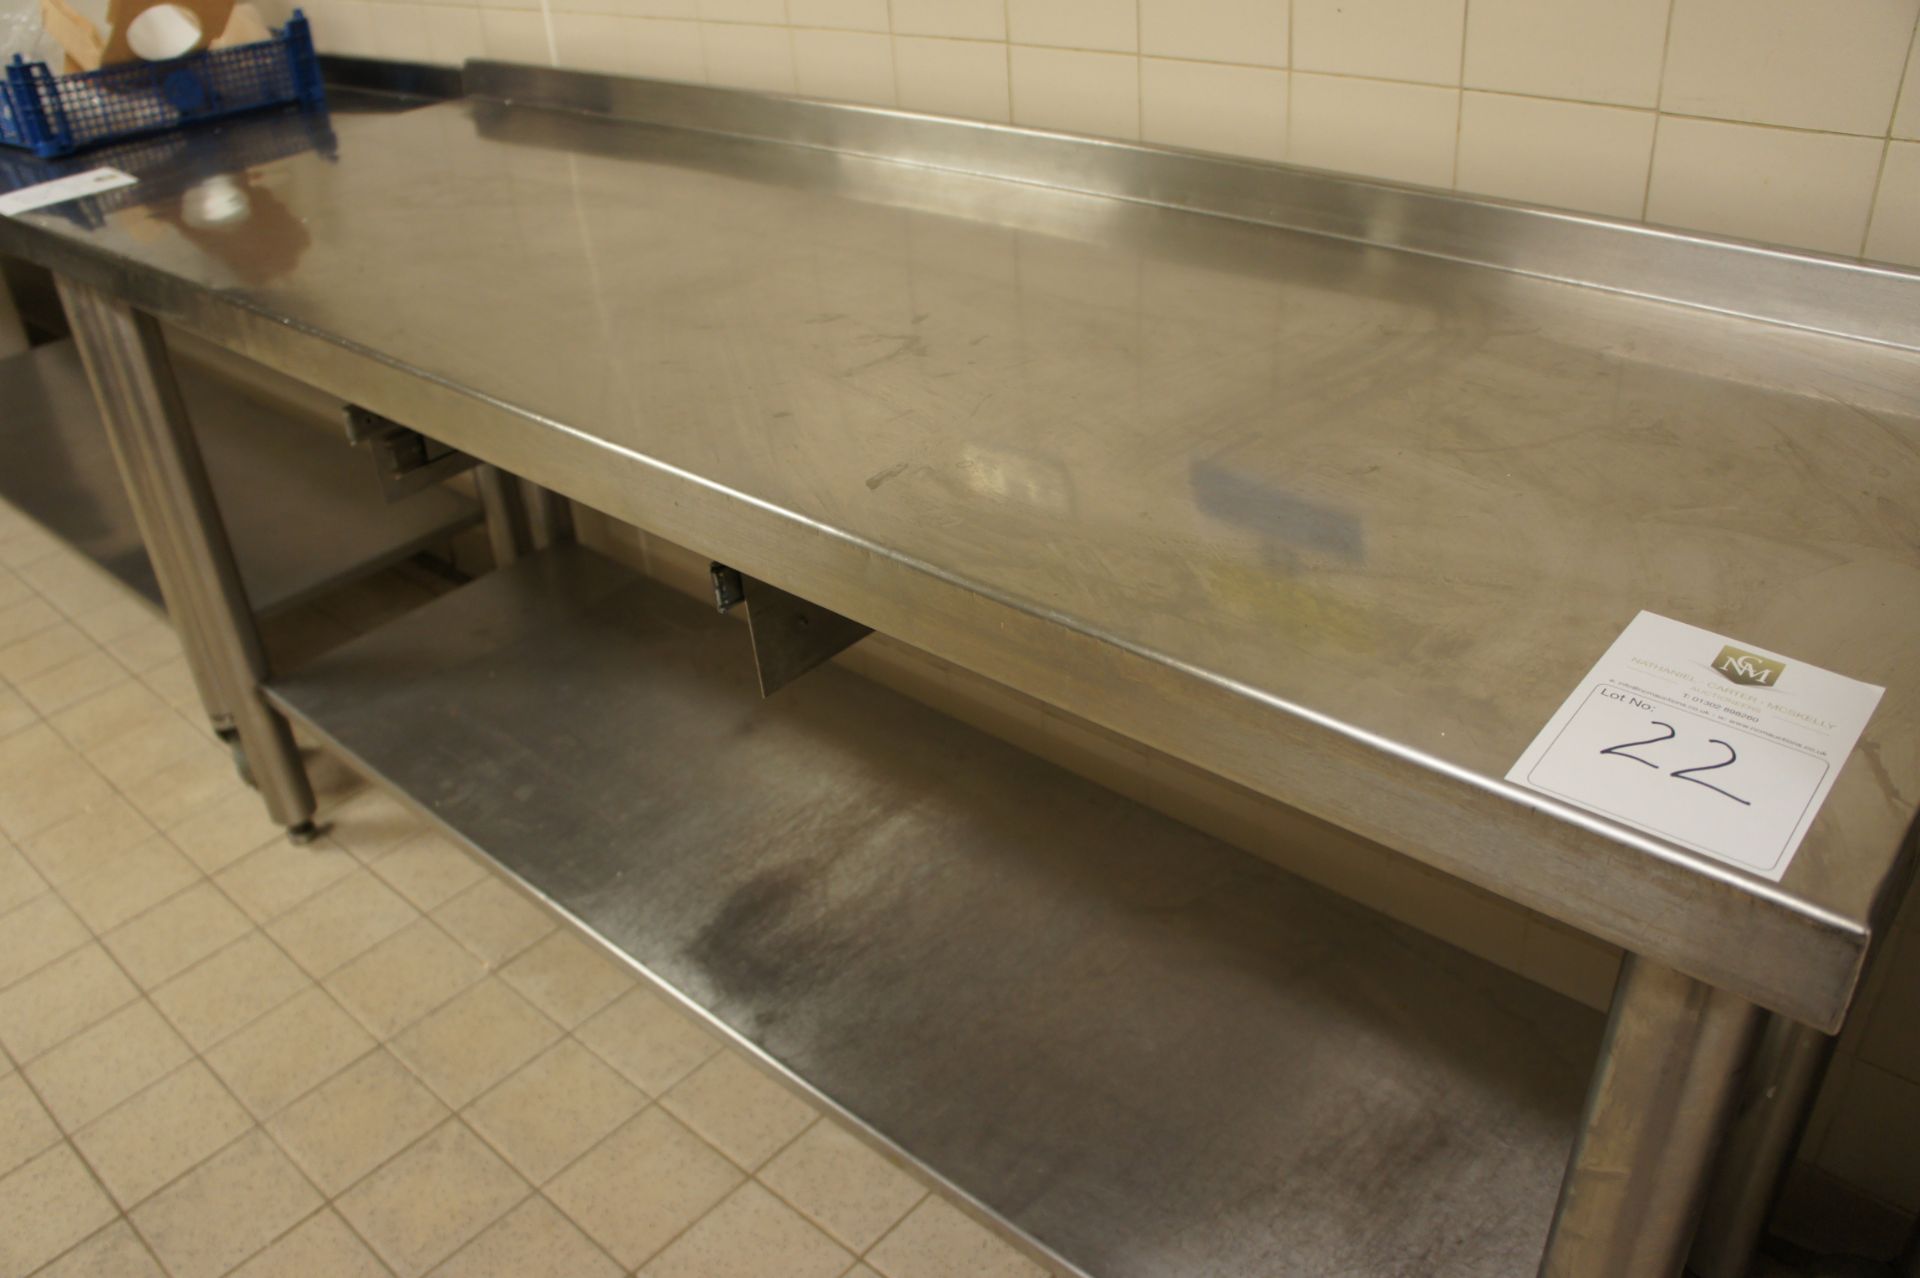 Stainless steel preparation table with shelf under, 1800mm - Image 2 of 2